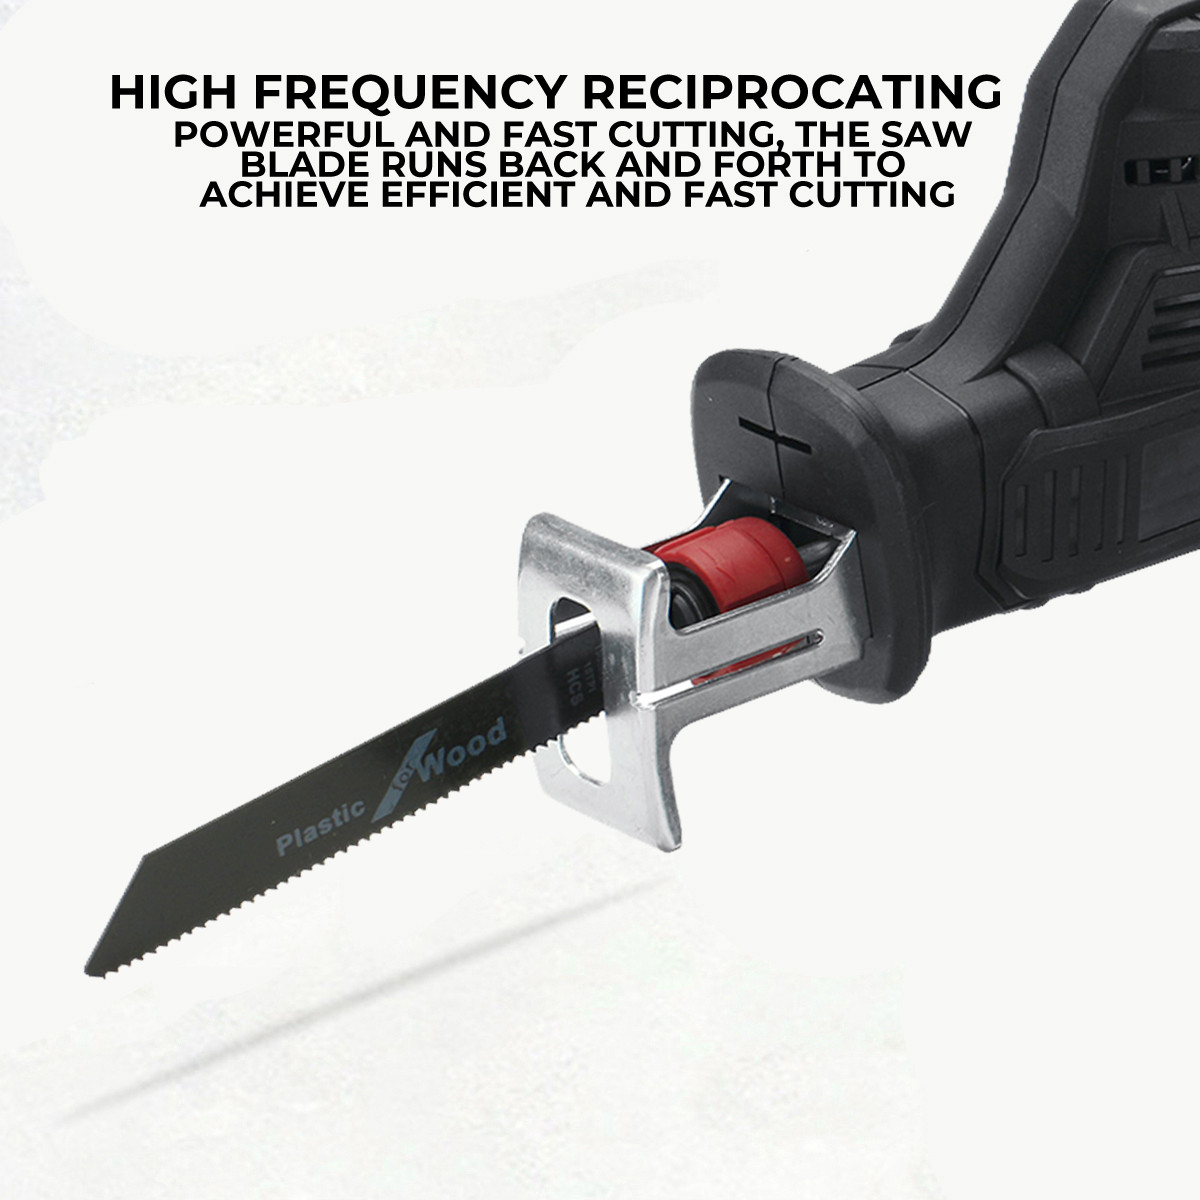 88VF-Electric-Reciprocating-Saw-Rechargeable-Portable-Branches-Metal-Wood-Sawing-Cutting-Tool-W-1-or-1769061-4